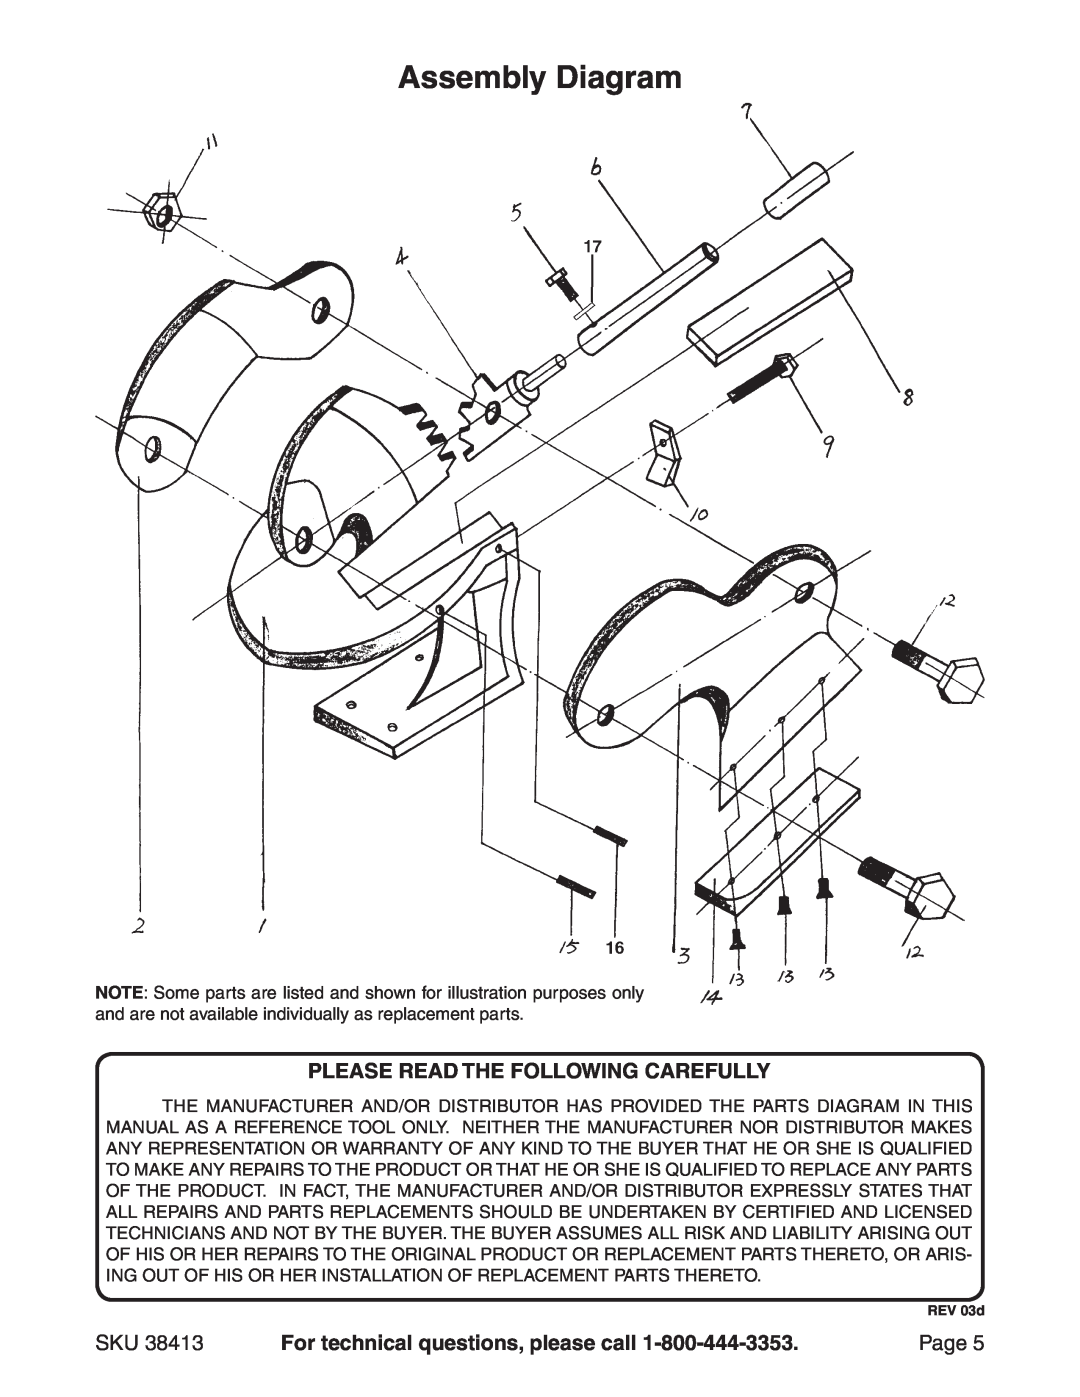 Harbor Freight Tools 38413 Assembly Diagram, Please Read The Following Carefully, For technical questions, please call 